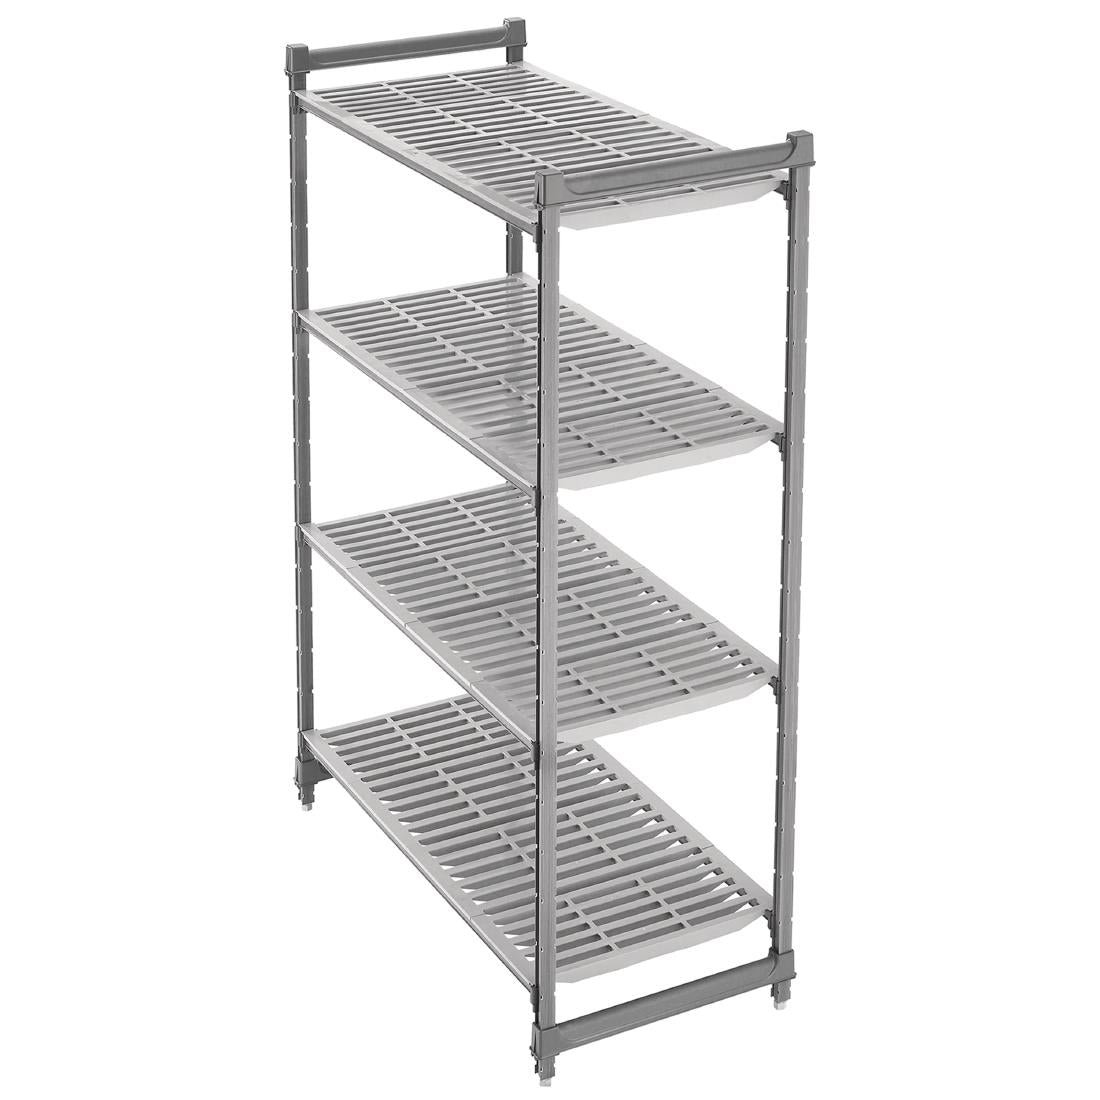 DM772 Cambro Stationary Vented 4 Shelf Starter Units 1830 x 915 x 610mm JD Catering Equipment Solutions Ltd